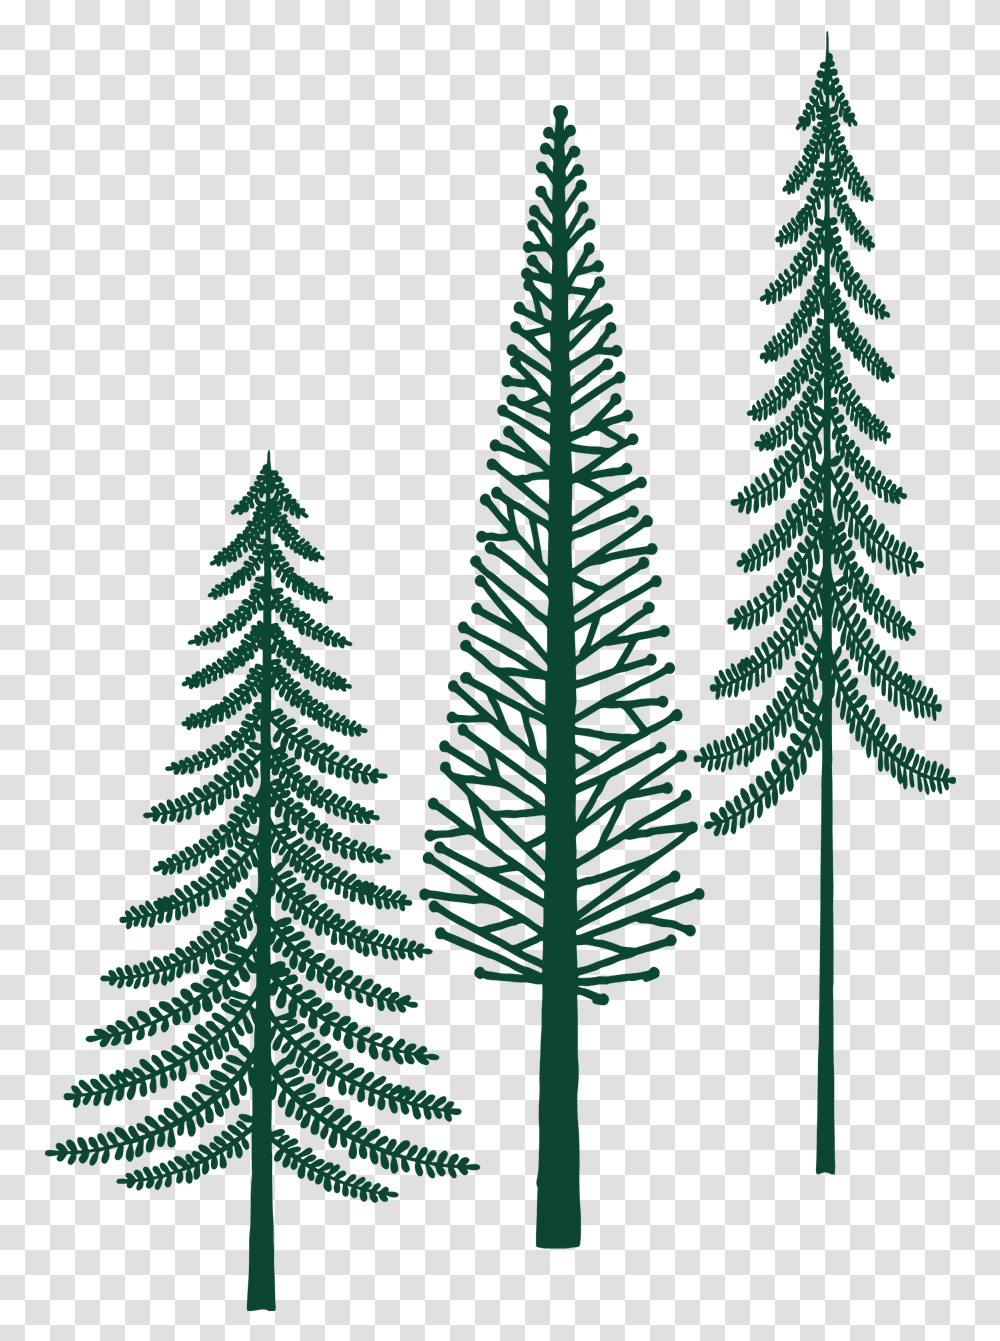 Evergreen Trees Forest Tree Free Vector Graphic On Pixabay White Pine, Plant, Ornament, Pattern, Fractal Transparent Png